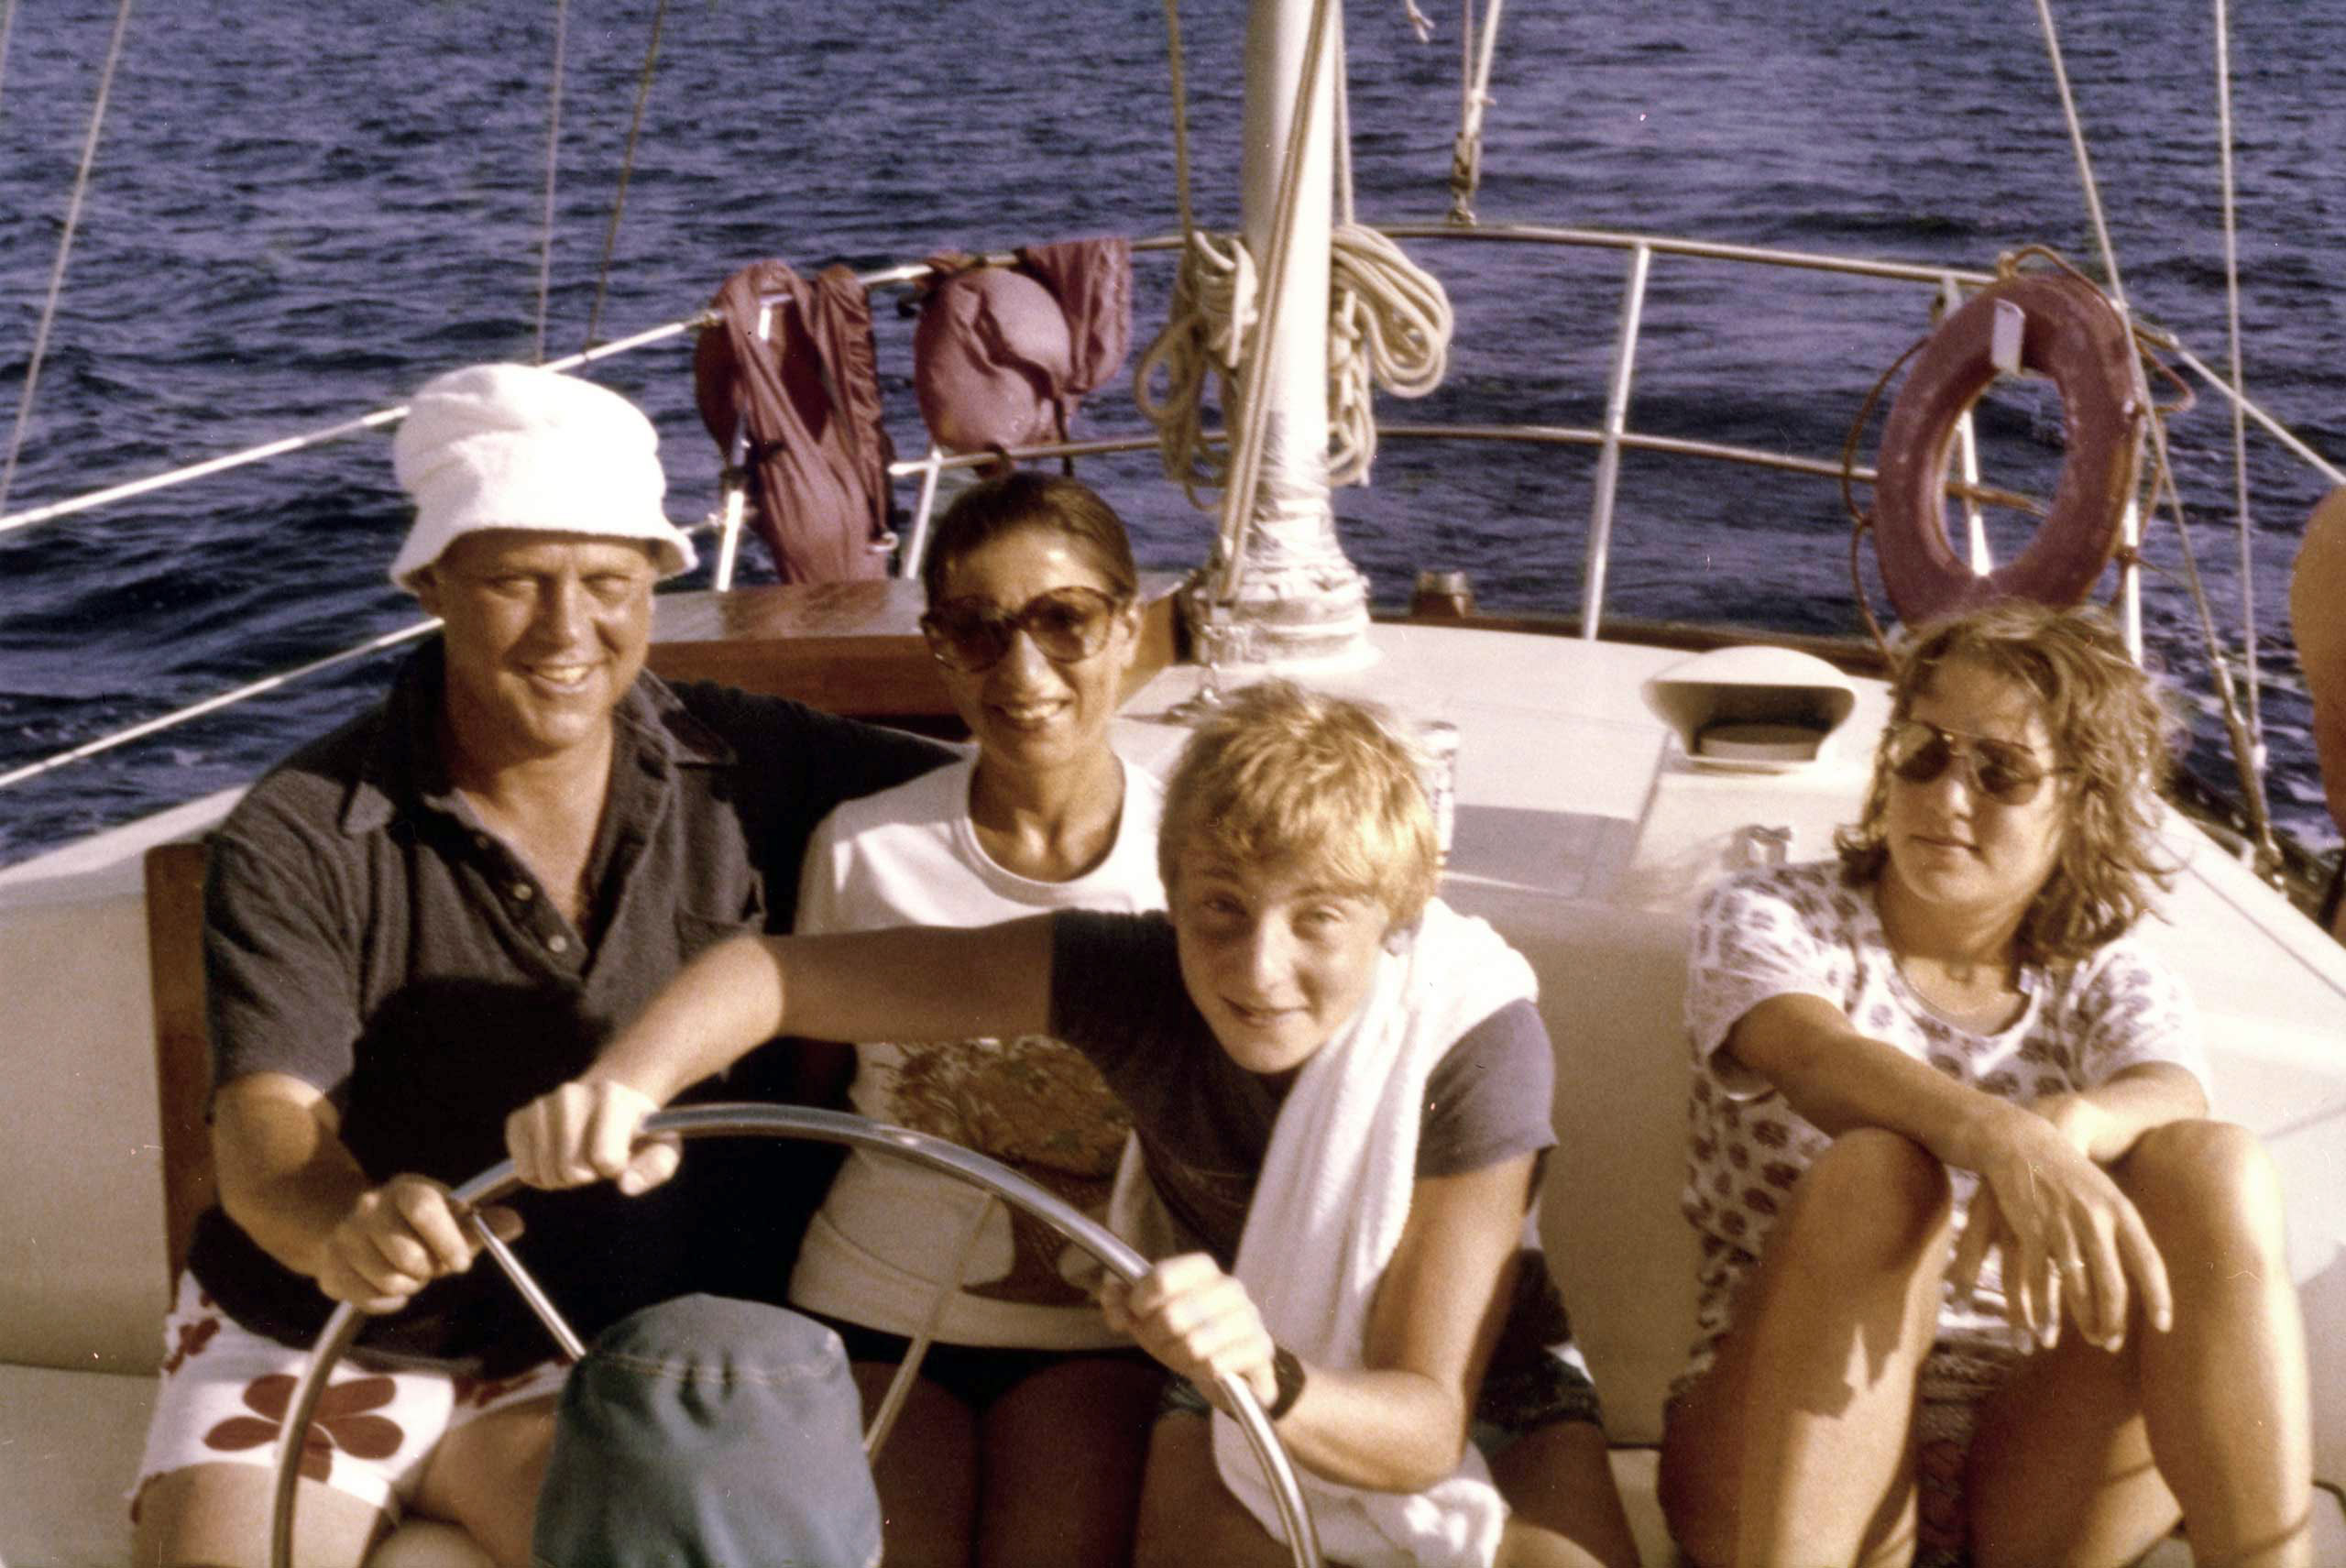 Ruth Bader Ginsburg, her husband, Martin, and their children, James and Jane, in a boat off the shore of St. Thomas in the Virgin Islands, December 1980. (Collection of the Supreme Court of the United States)